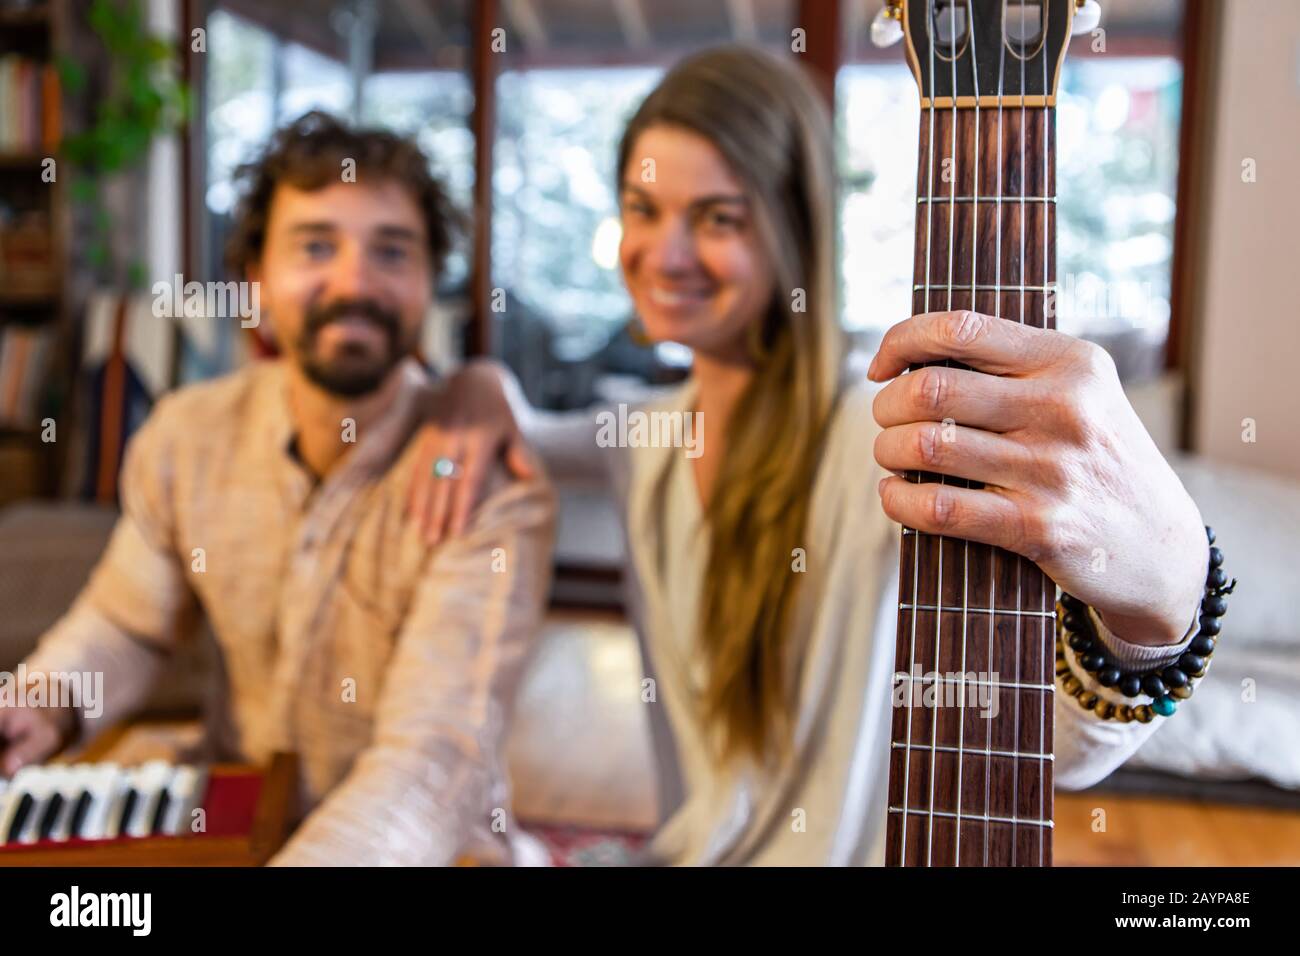 Shamanic man and woman holding classical guitar with nylon strings and man playing harmonium for sacred and kirtan music looking at camera Stock Photo